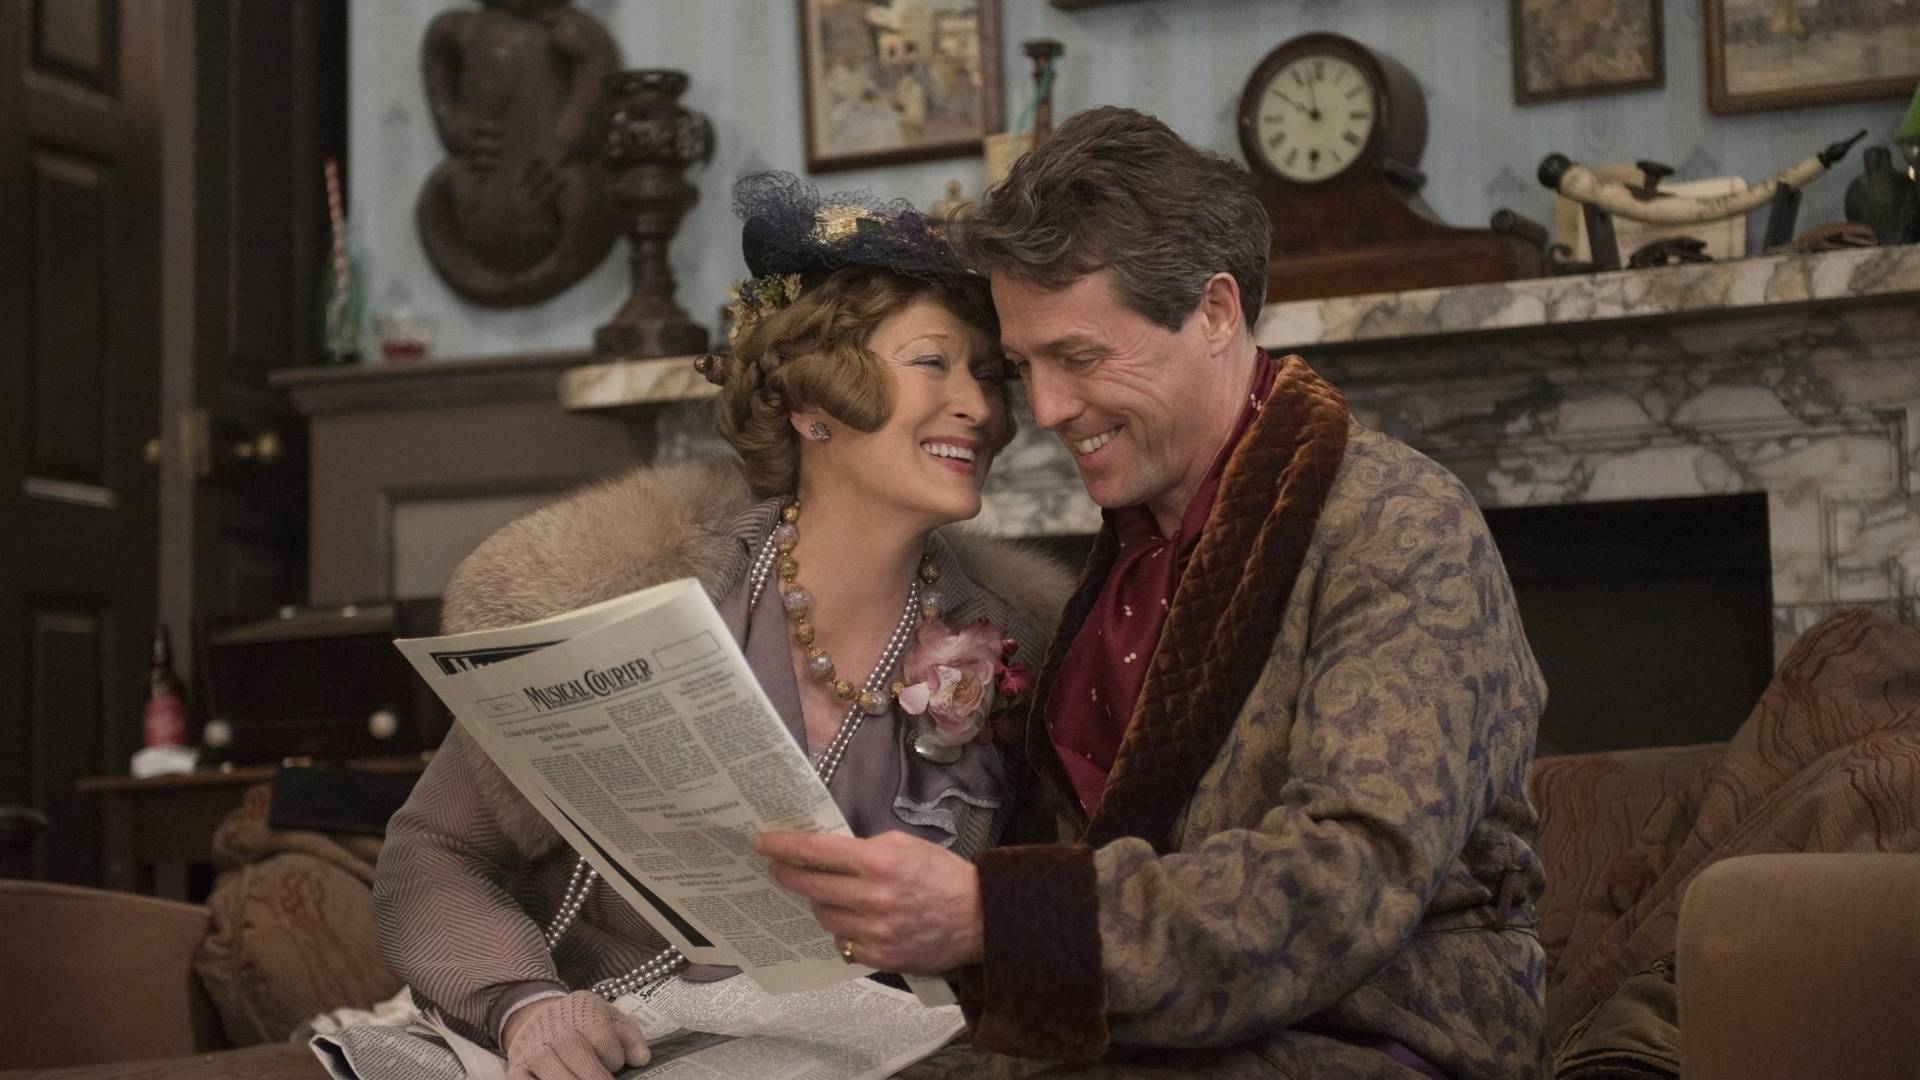 Credit: http://pulseradio.fm/2016/08/12/florence-foster-jenkins-movie-review/